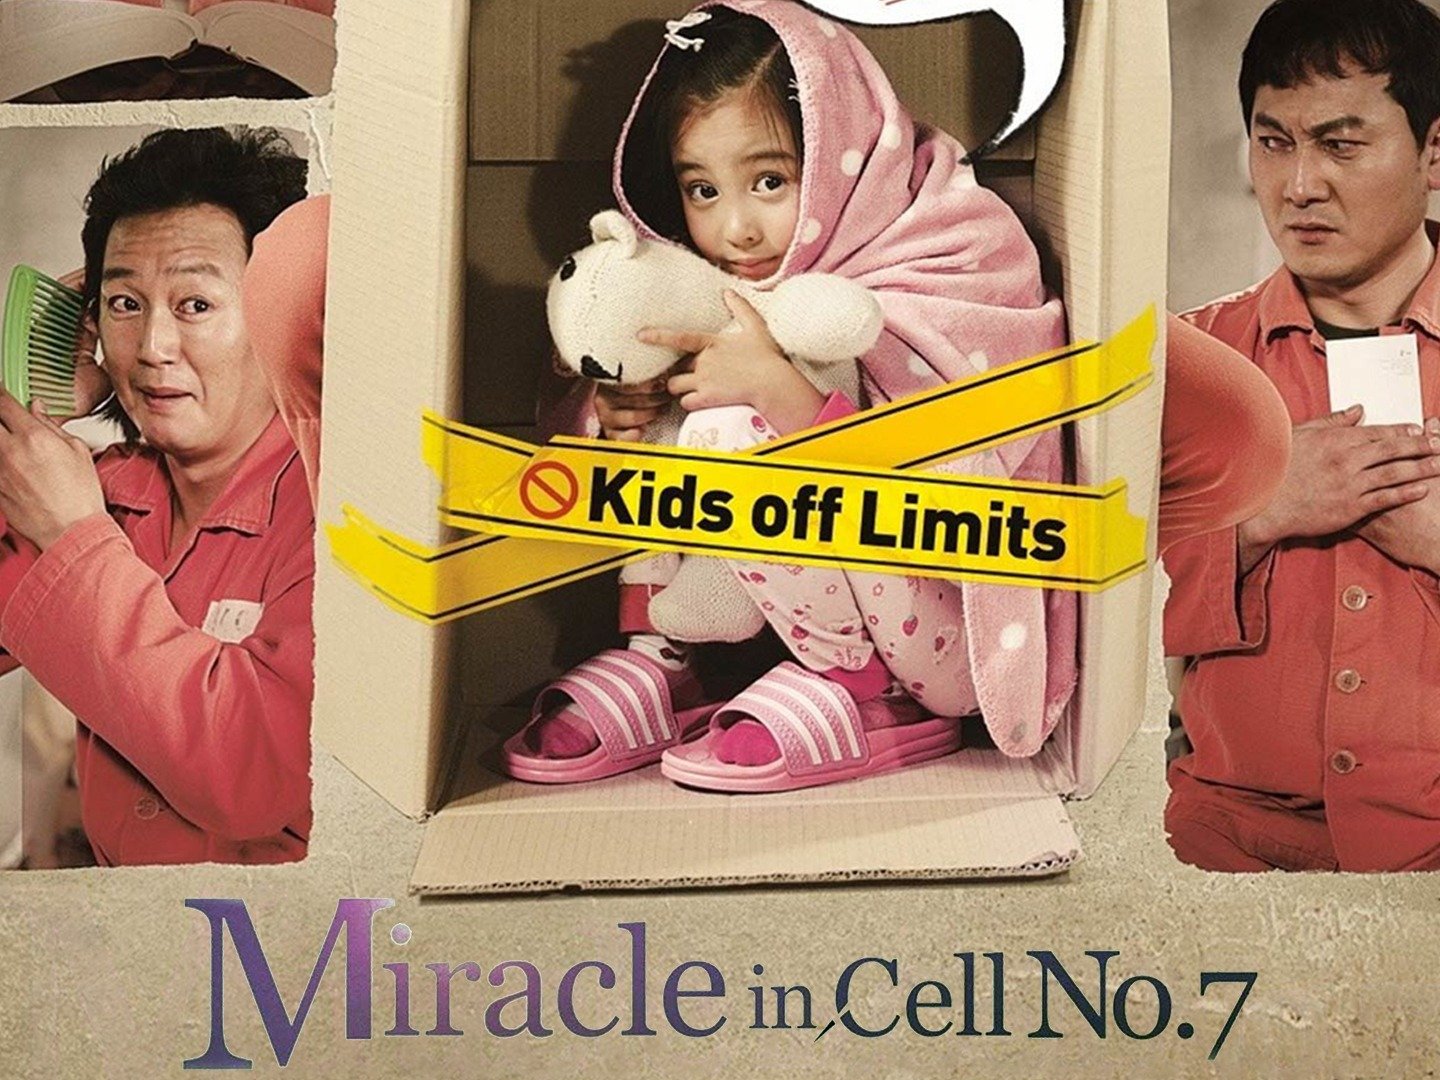 Full no korean movie in 7 cell miracle Miracle in